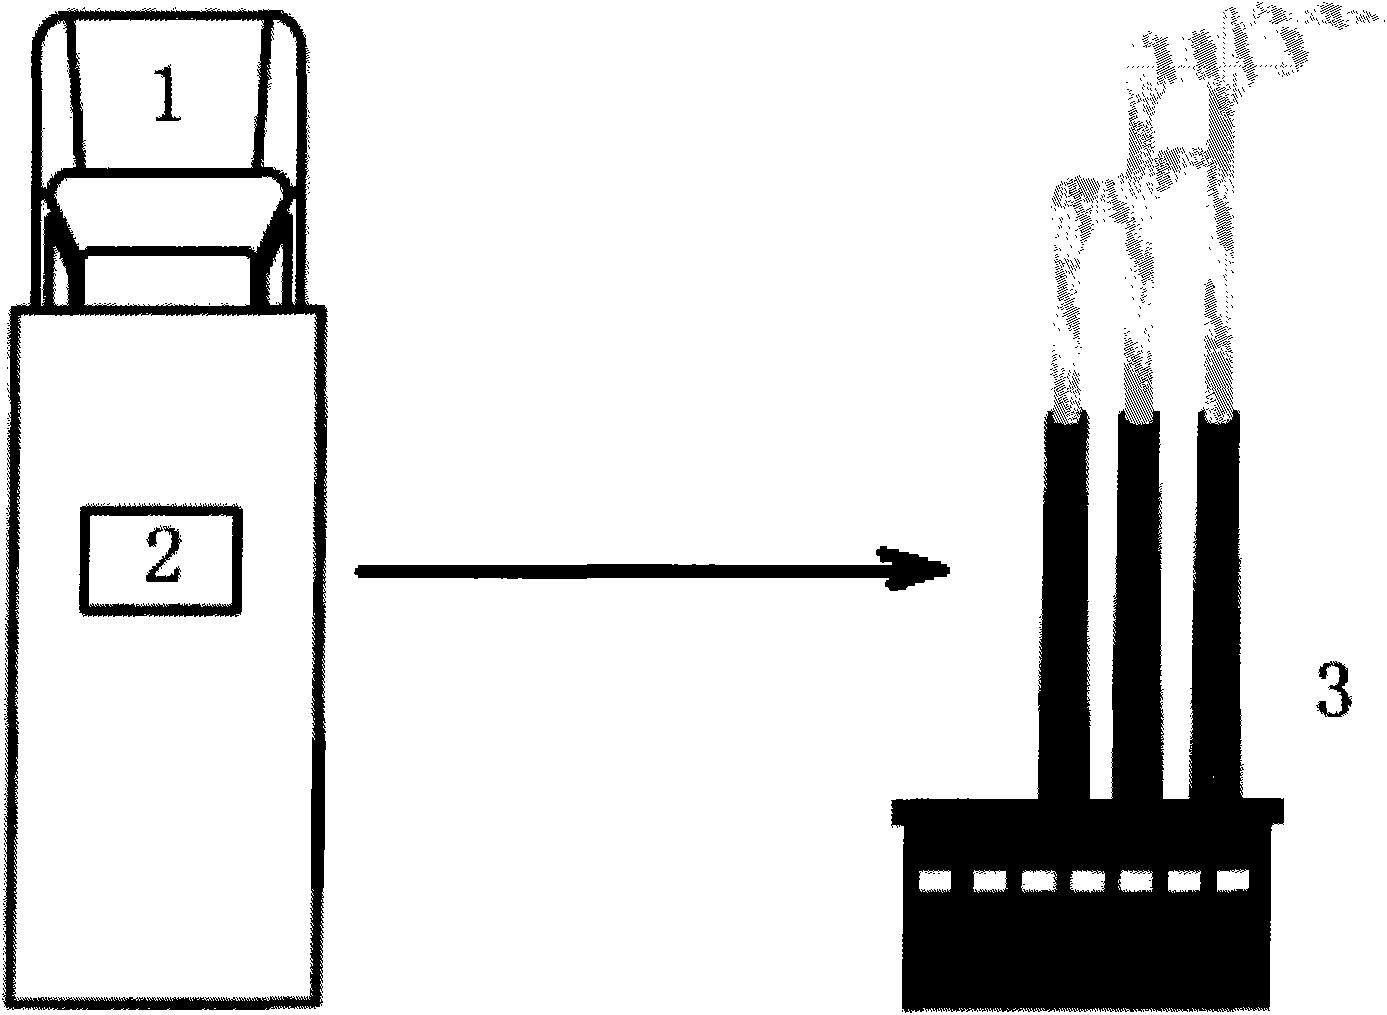 Two-dimensional imaging measurement system for vehicular pollution source smoke plume emission